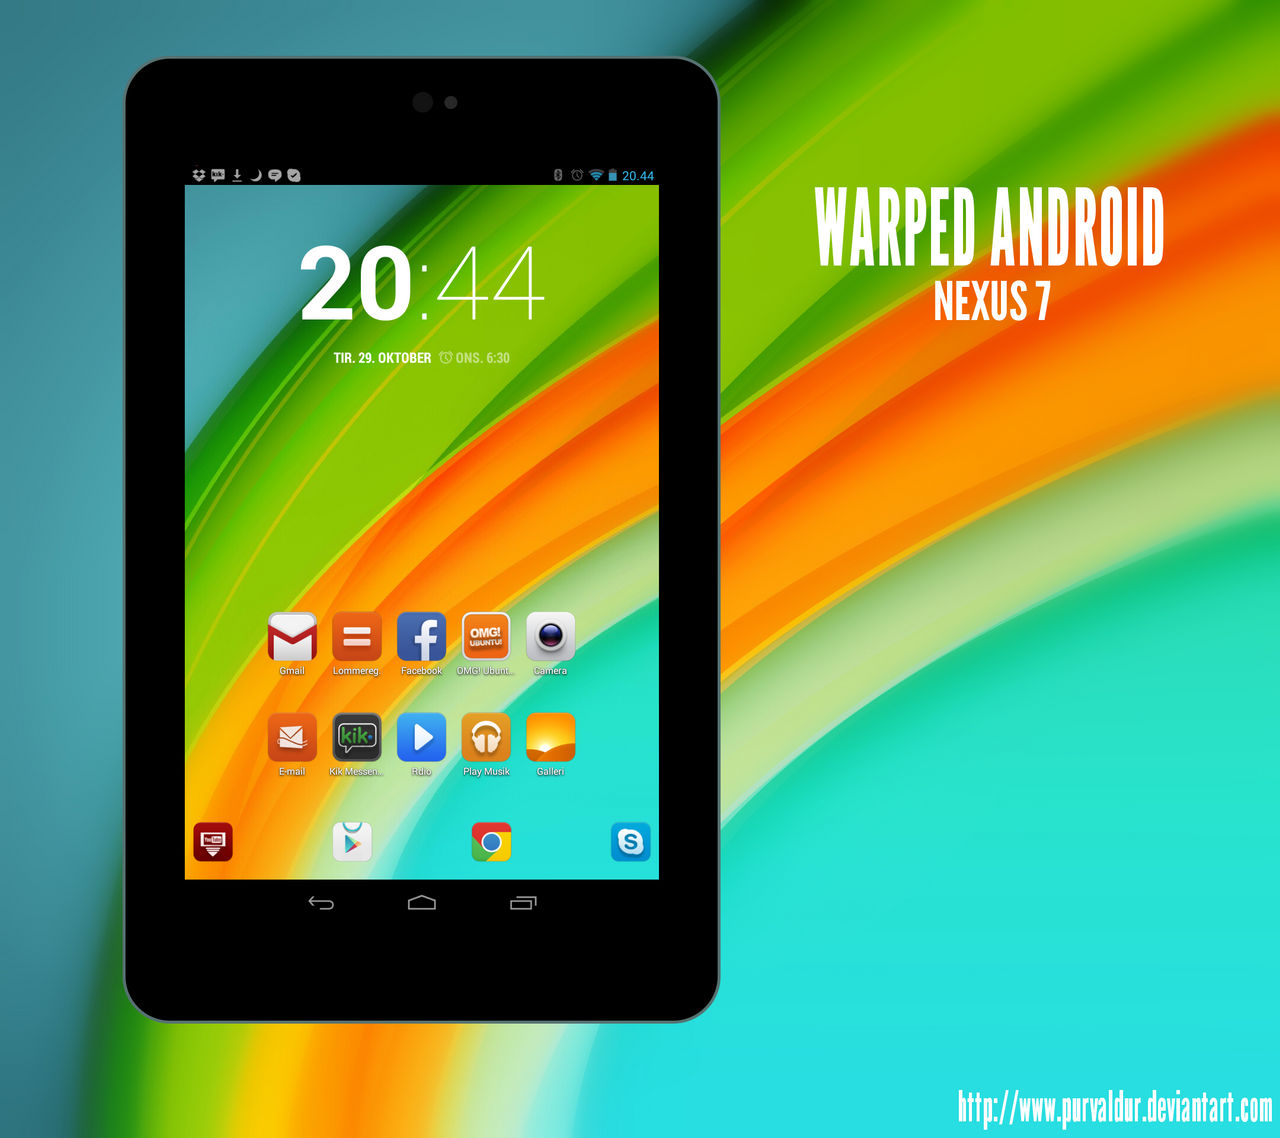 Warped Android